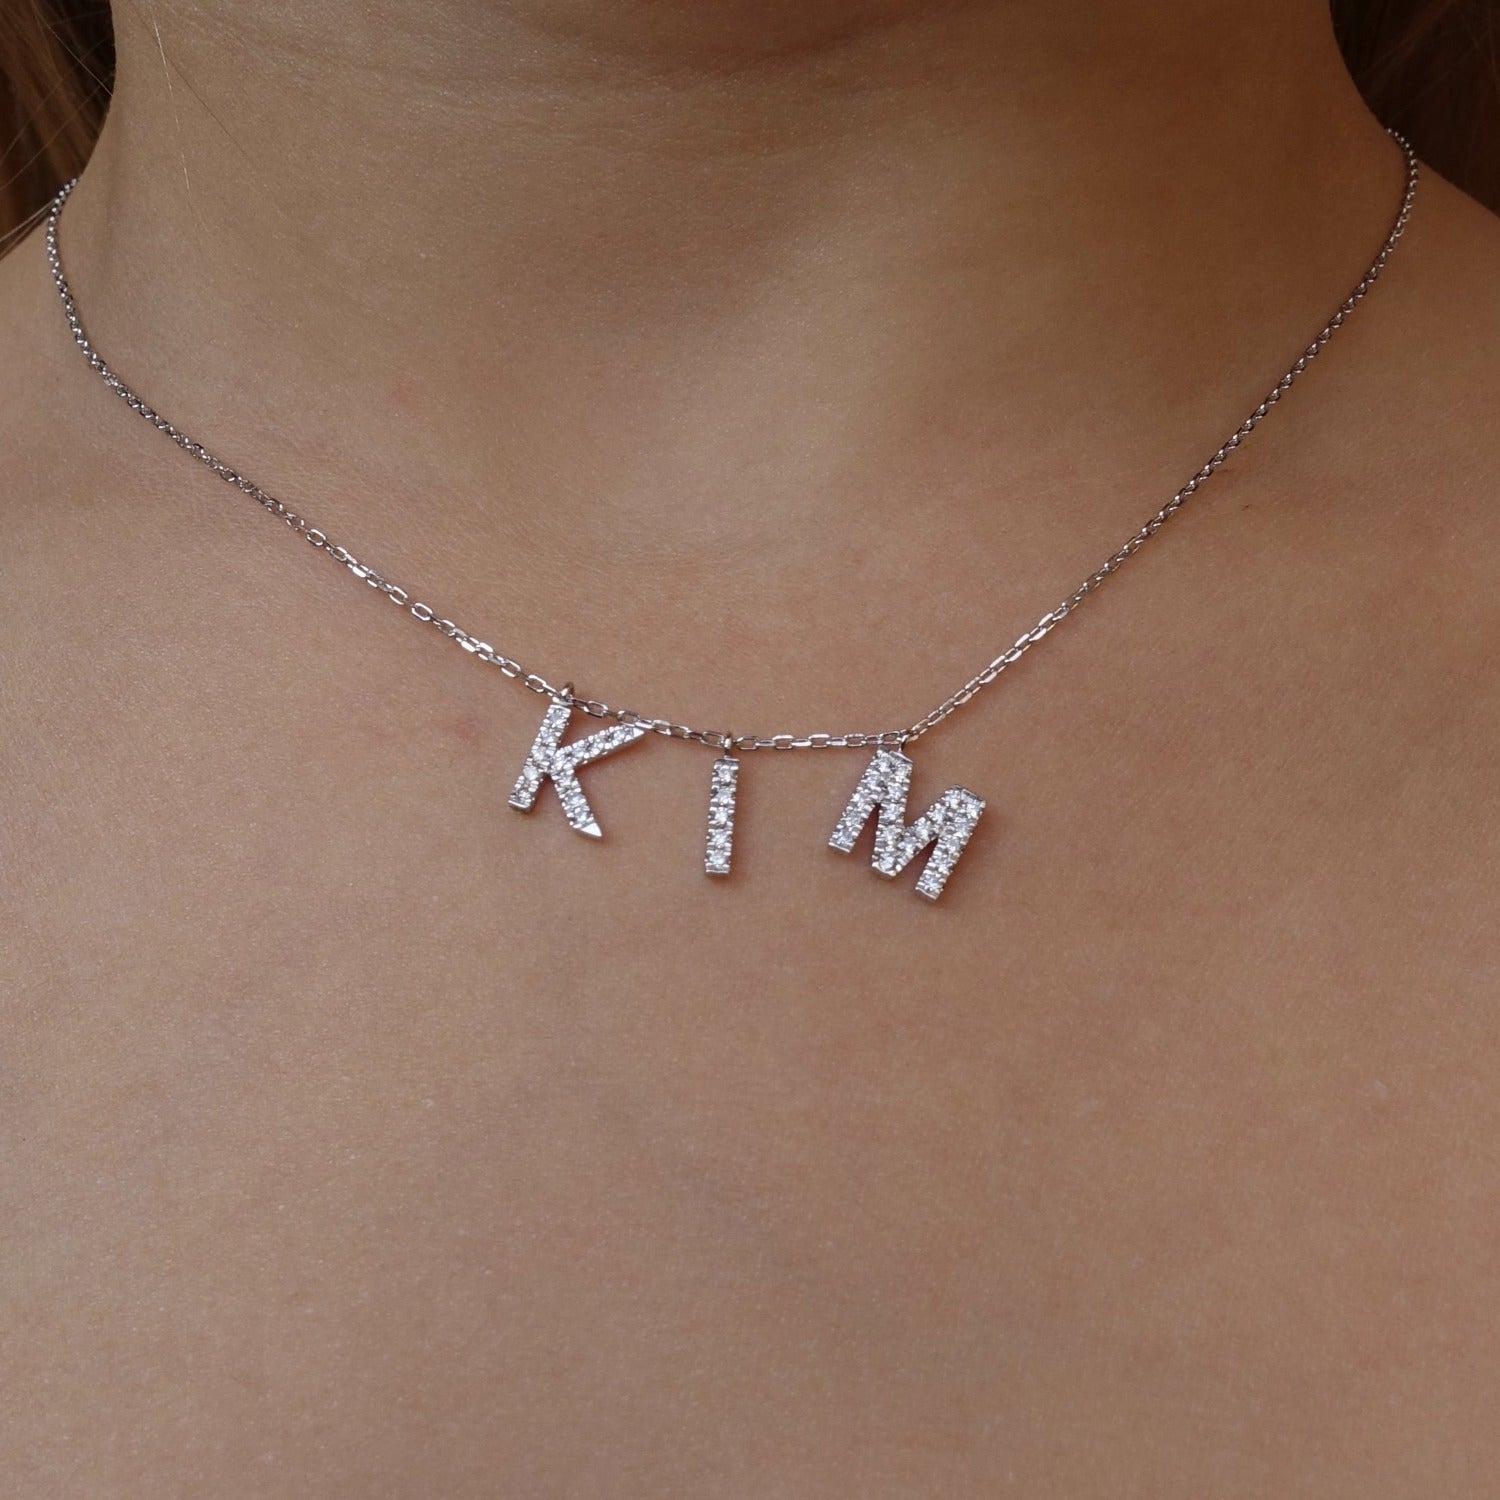 Personalized Mini Initial Necklace (3 initials)